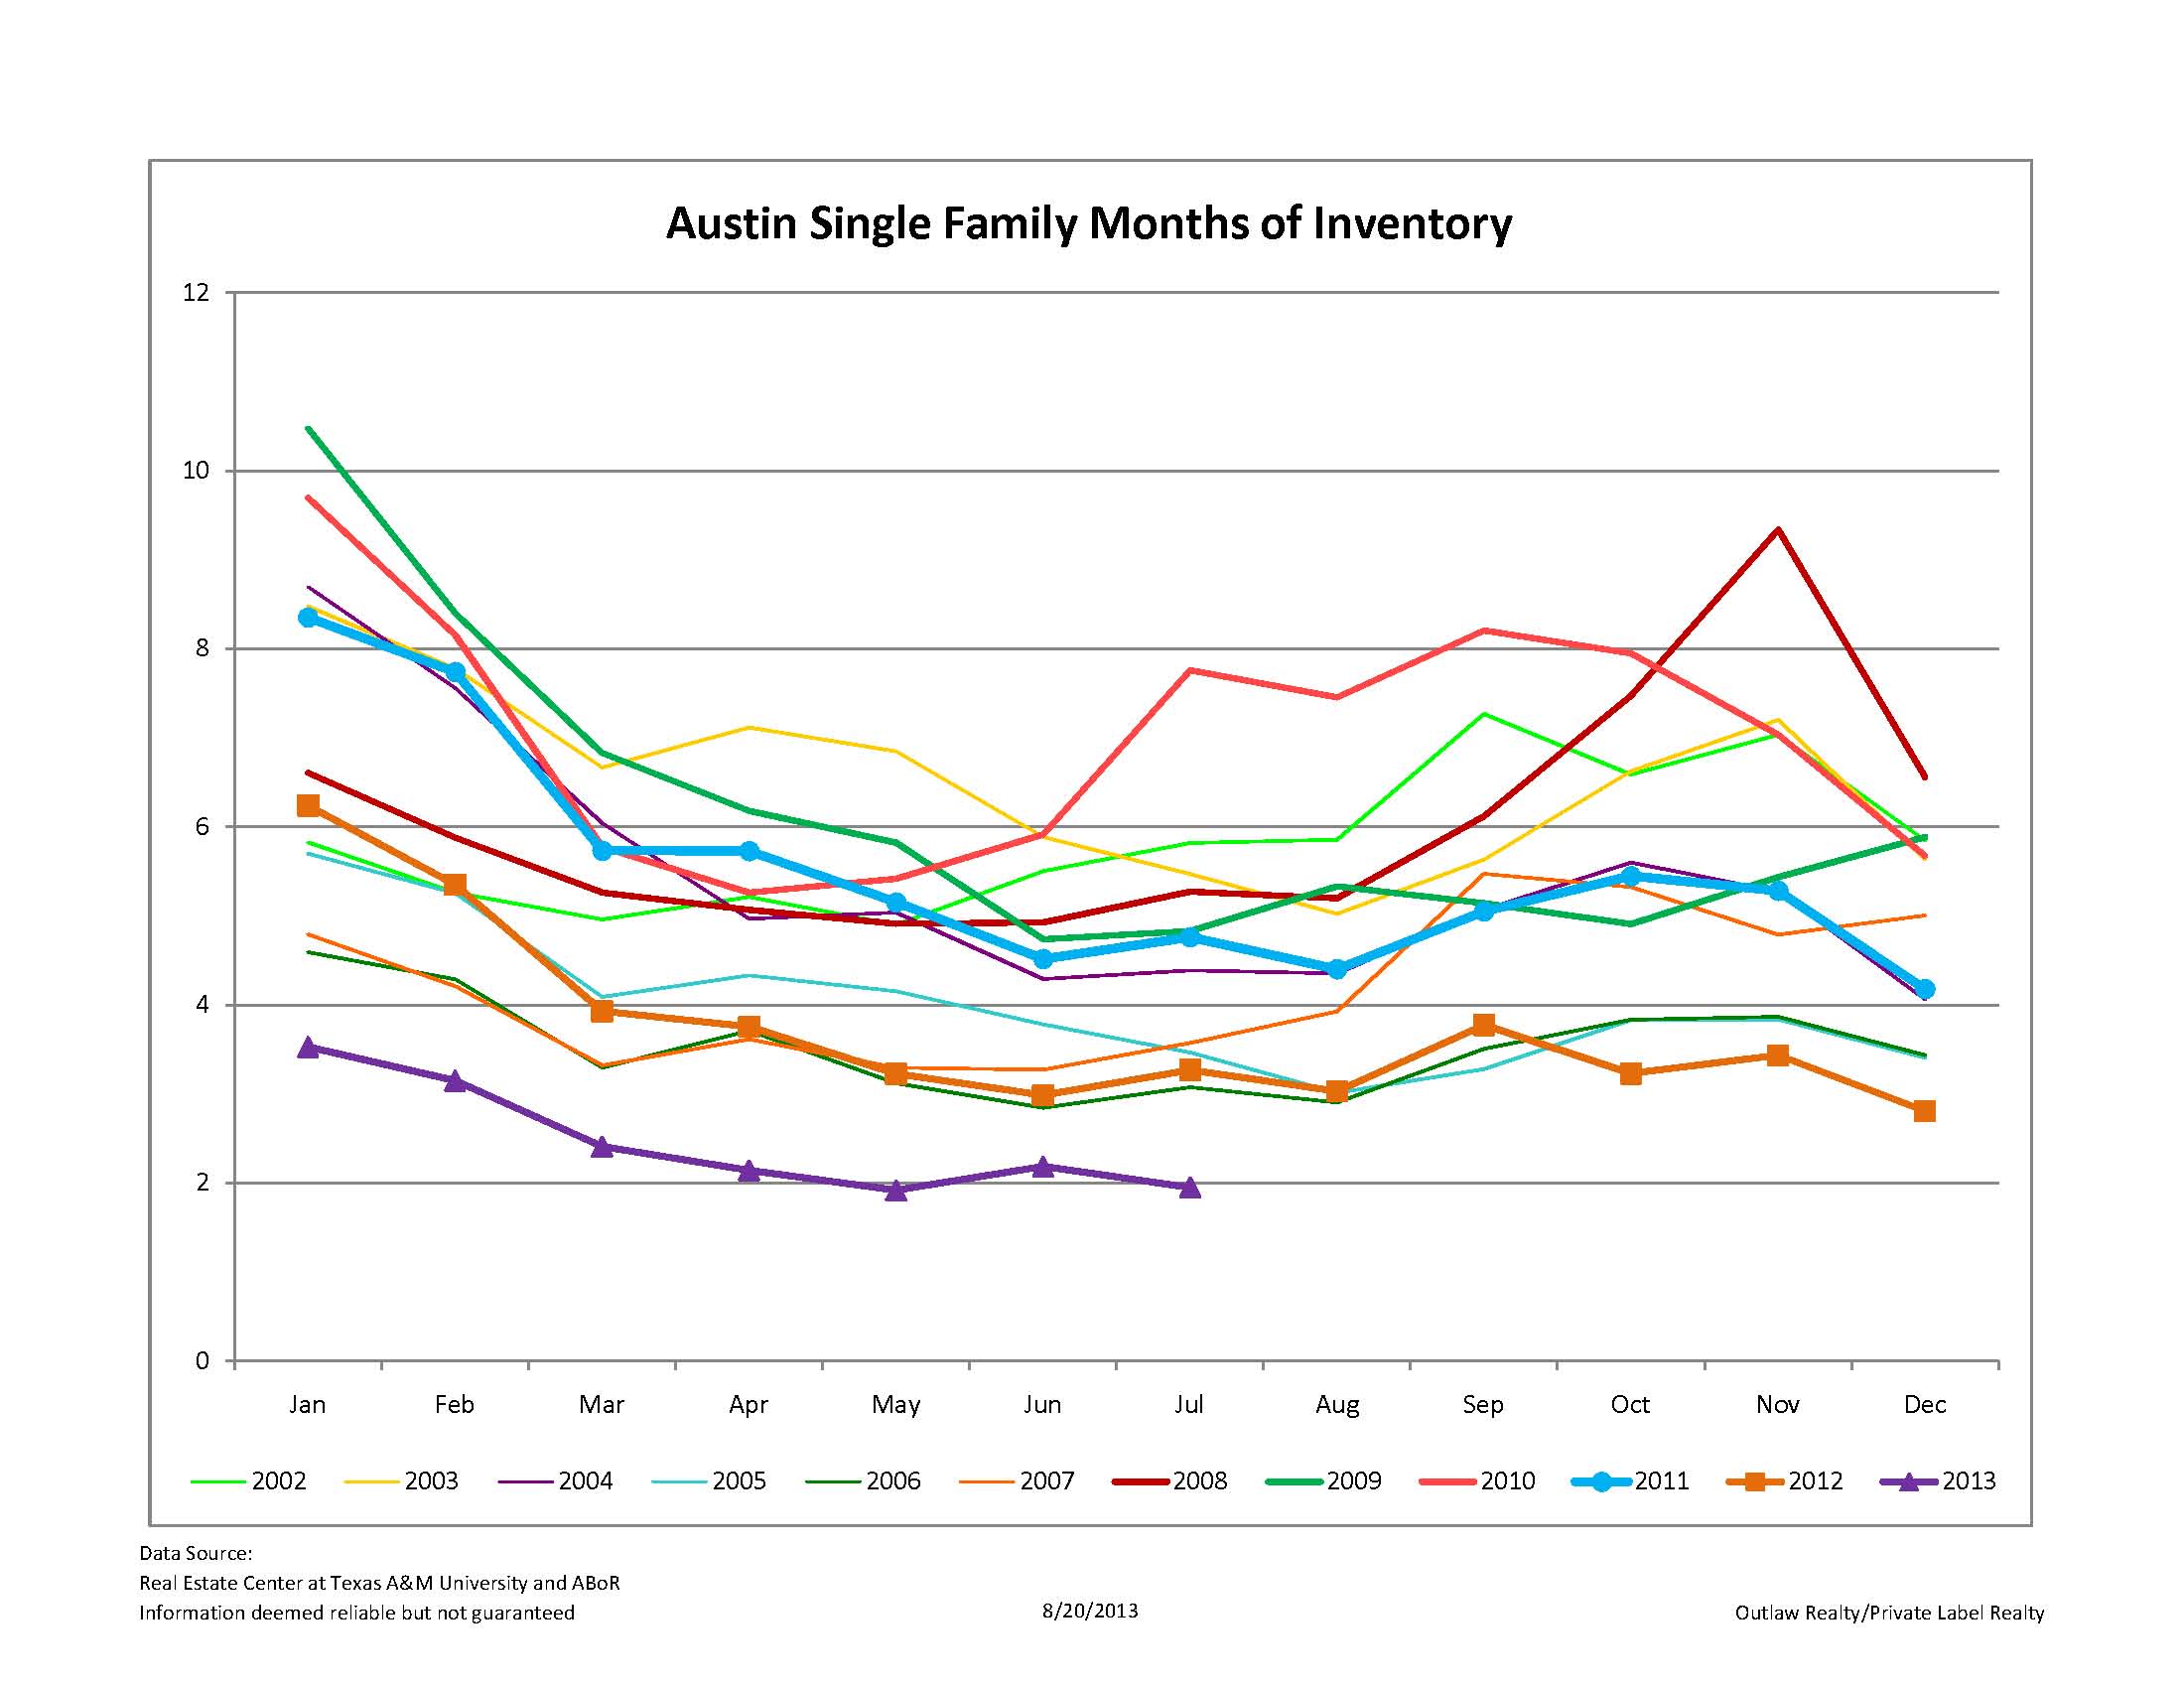 Austin Single Family Months of Inventory